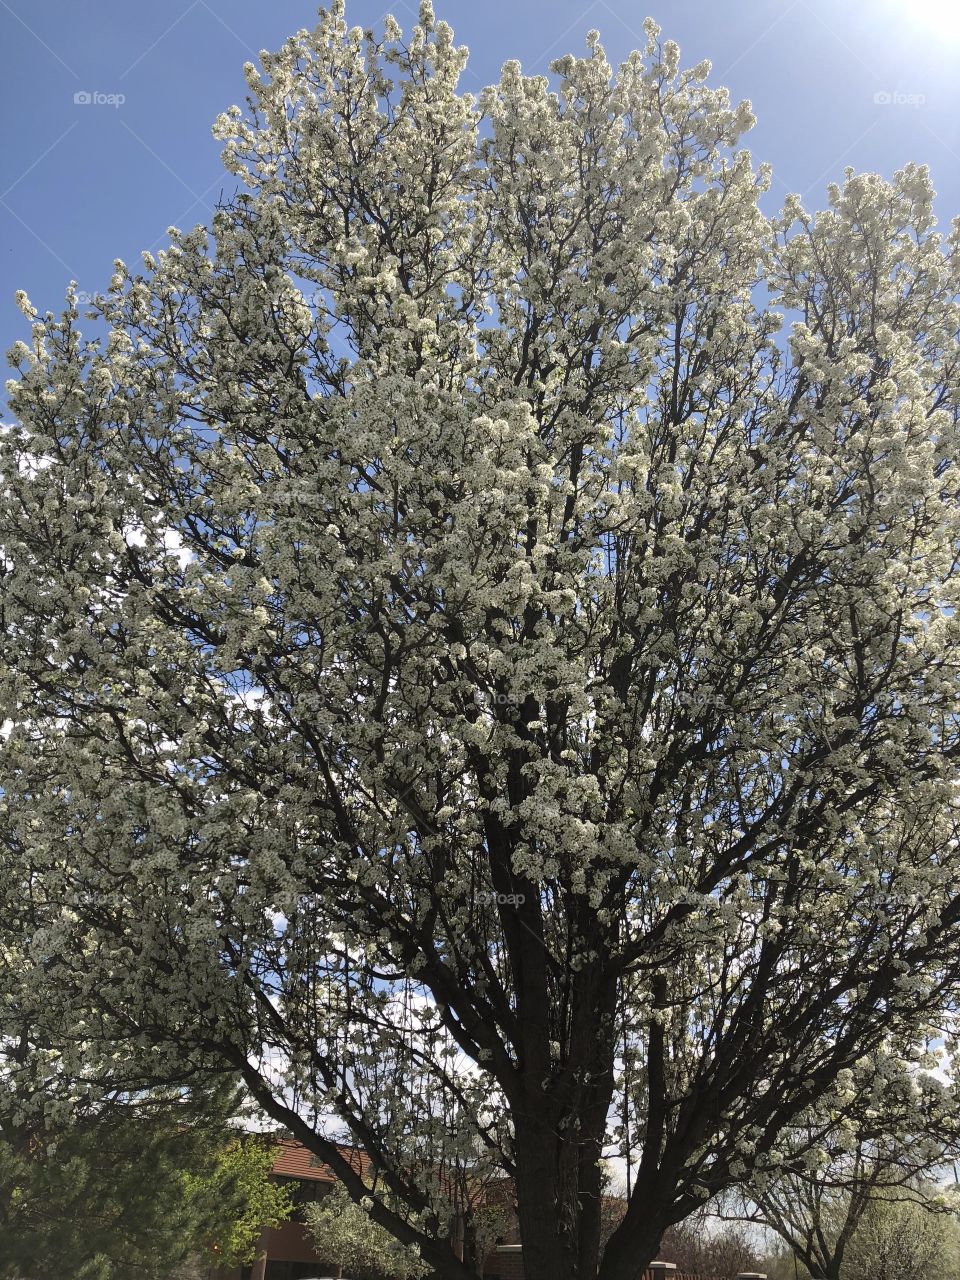 Tree with white flowers 